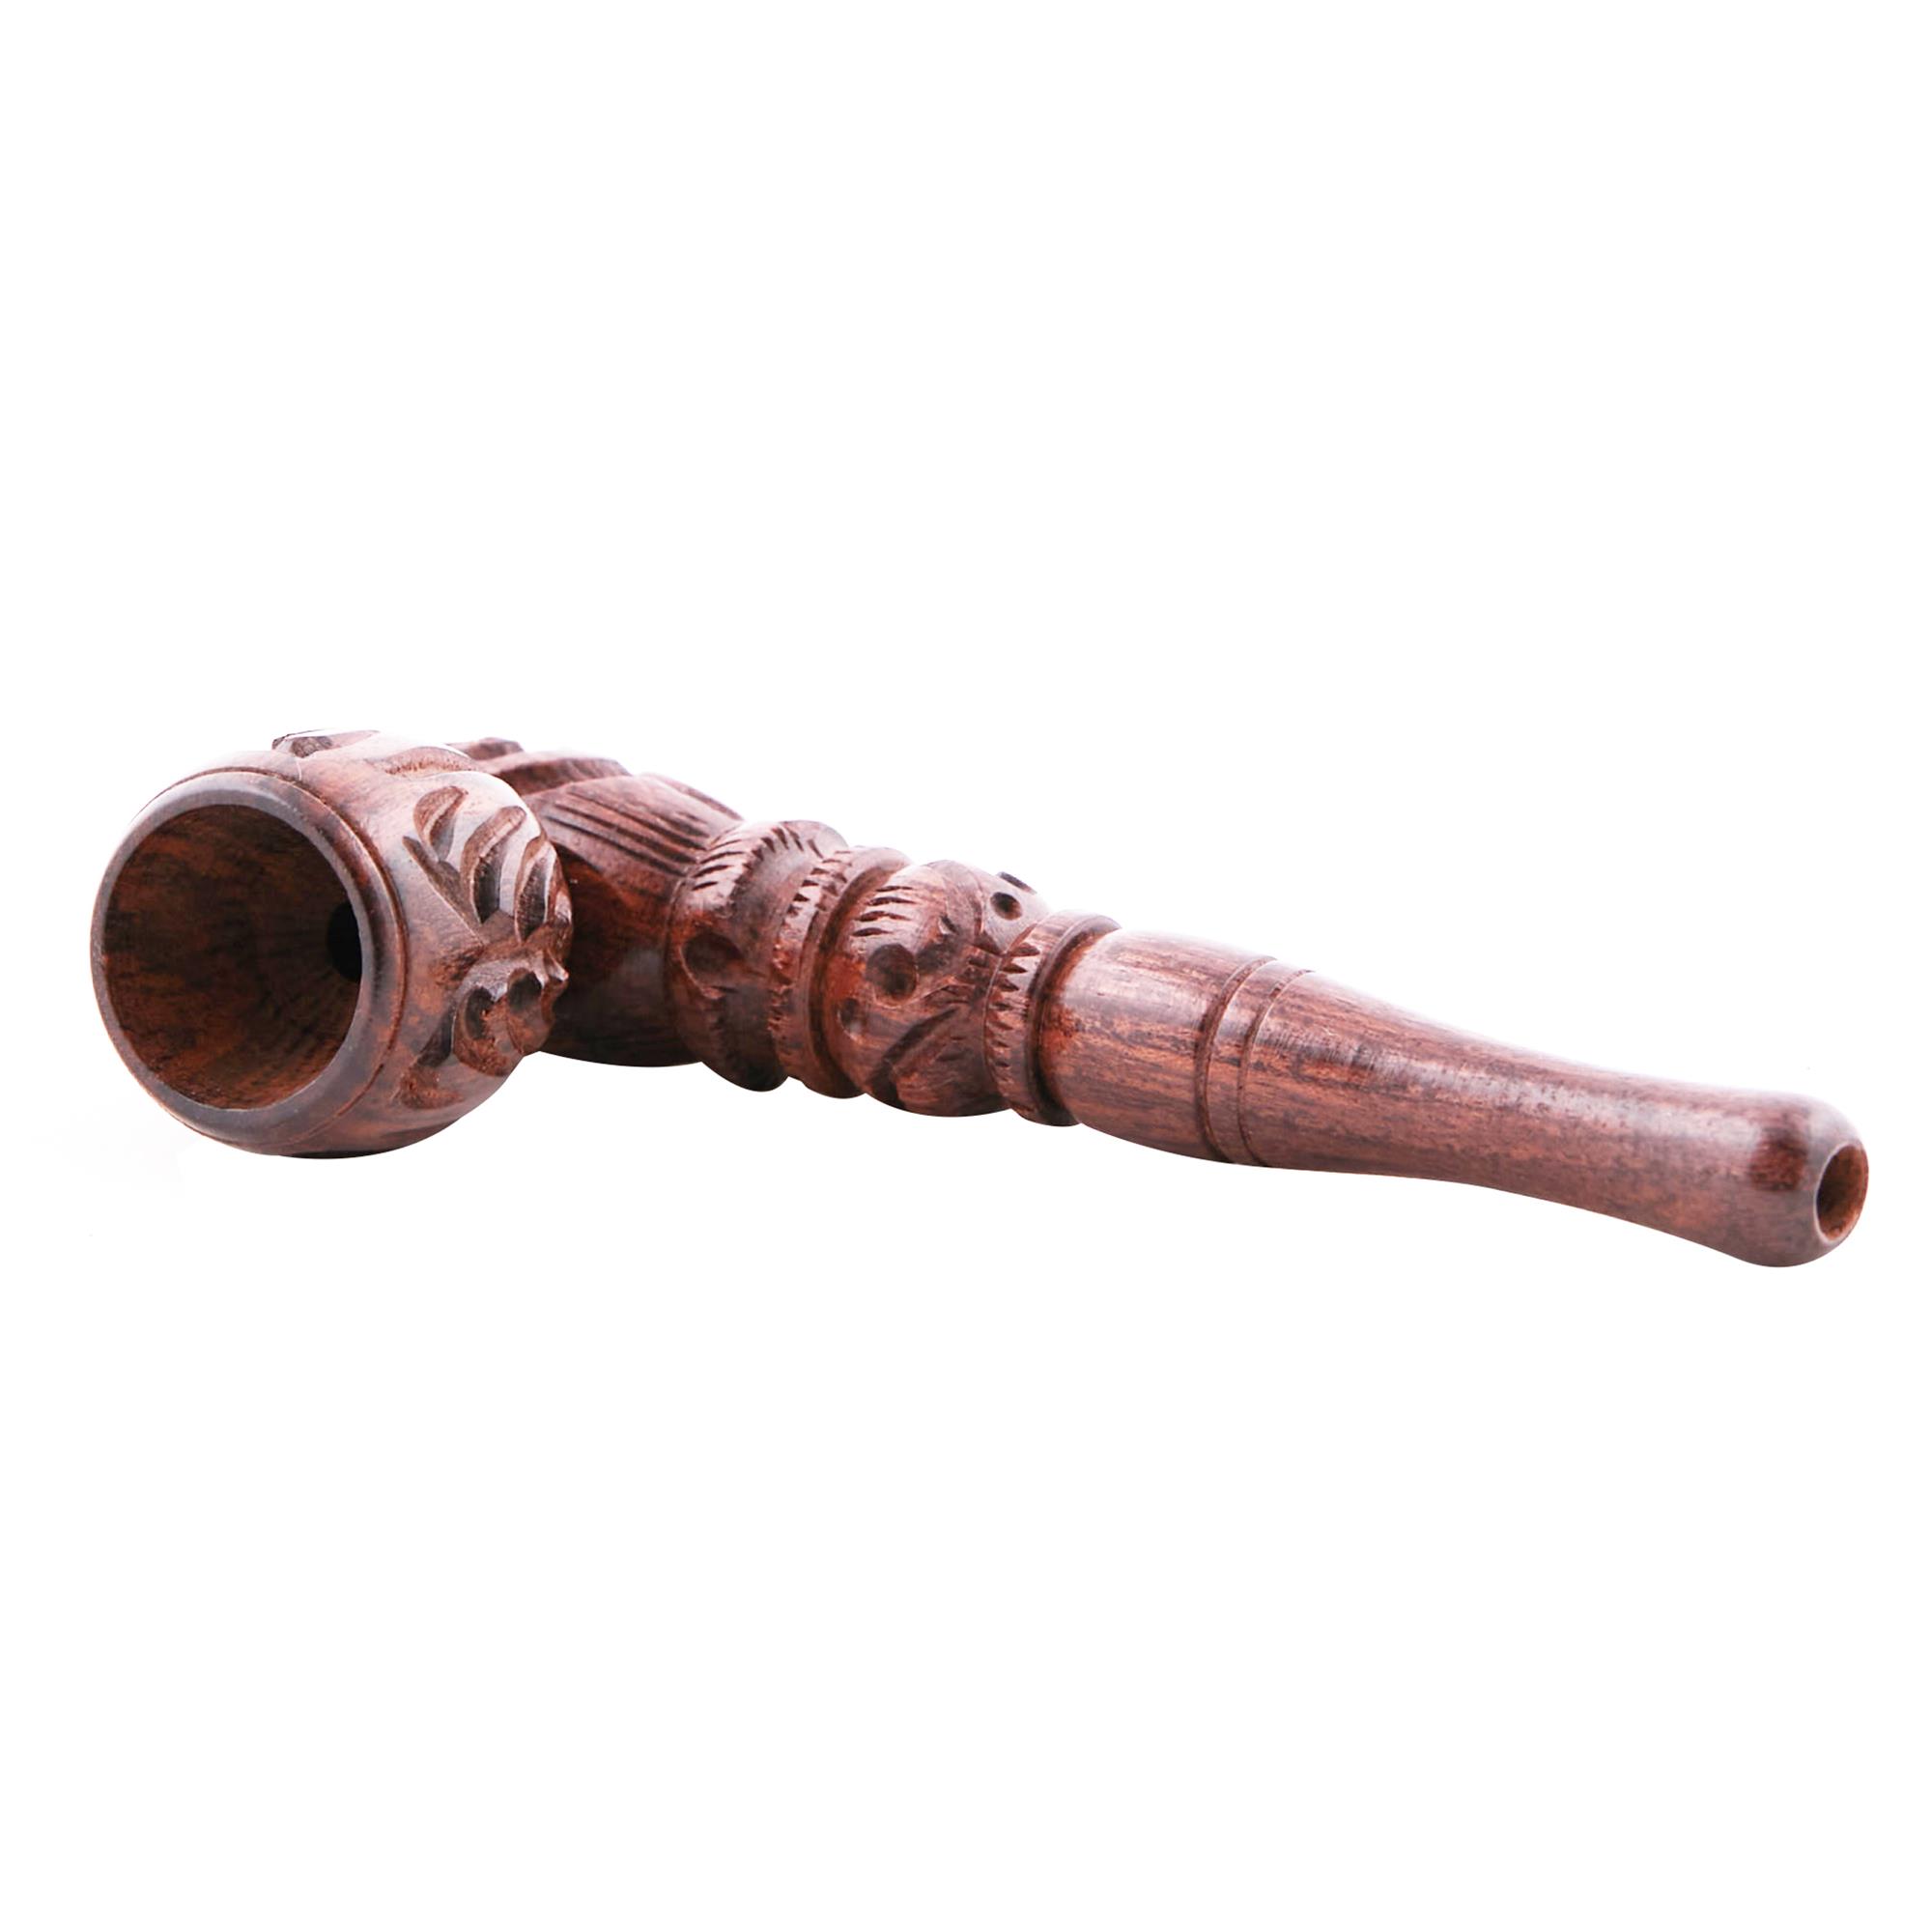 COMMON ASH WOOD PIPE